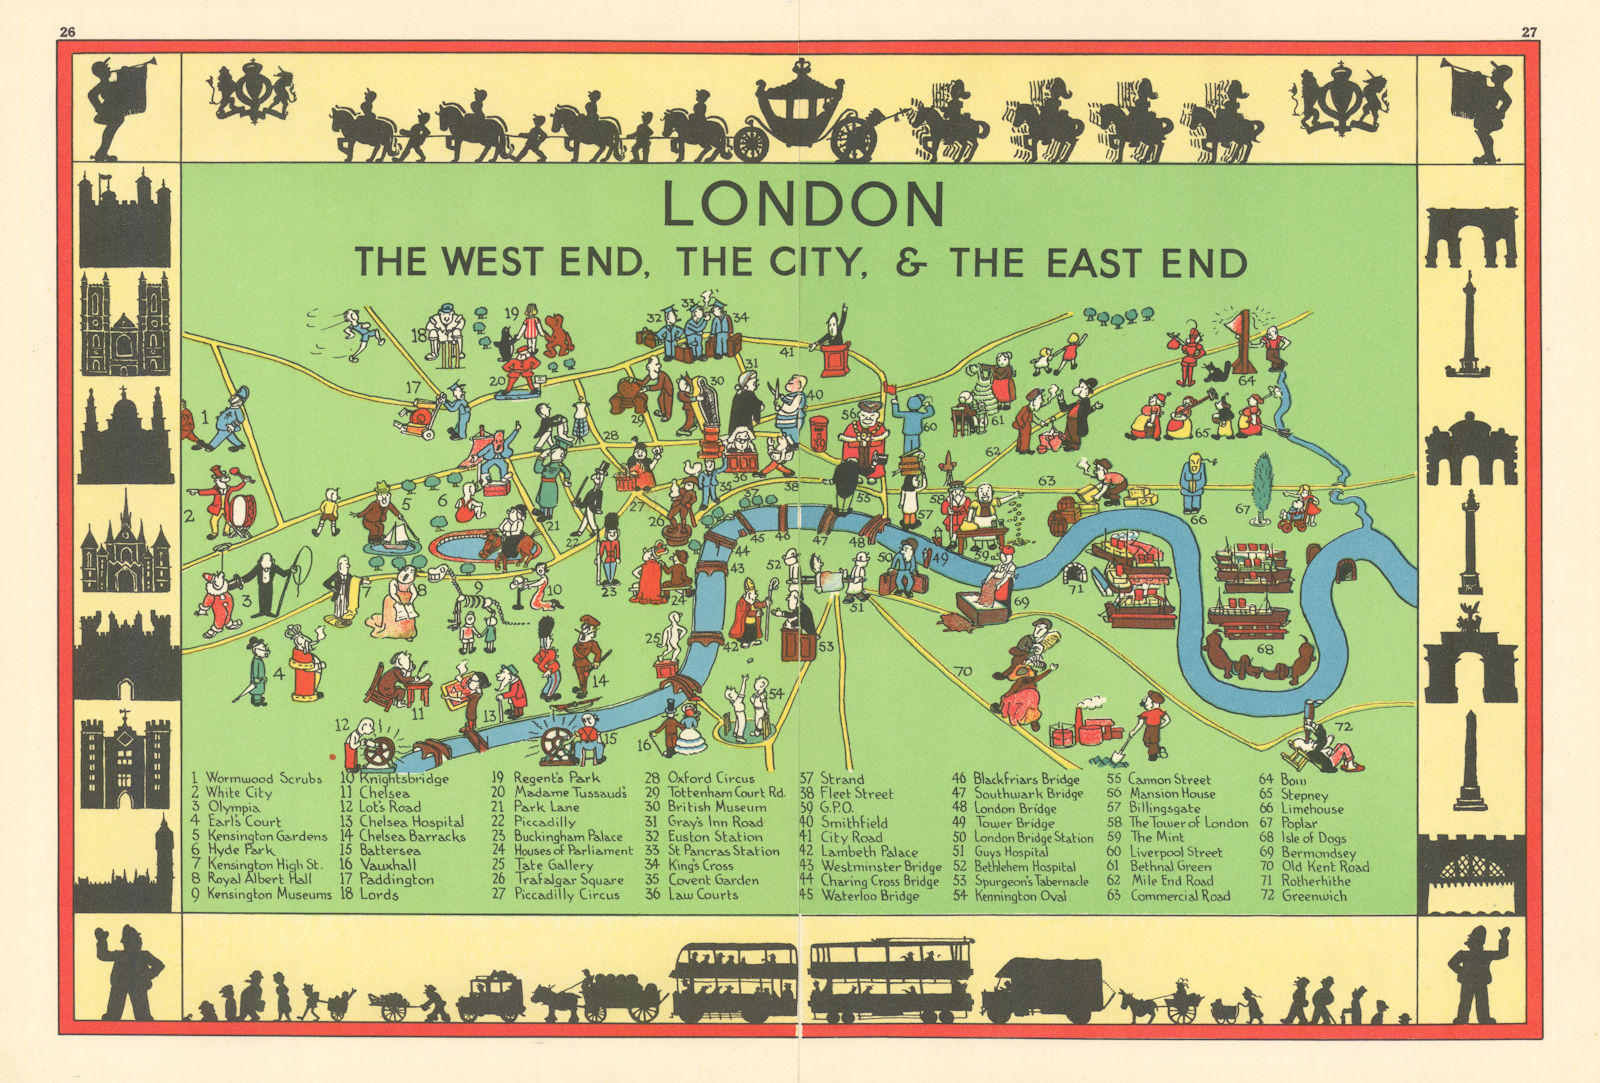 London: the West End, The City, & the East End pictorial map. ALNWICK 1937